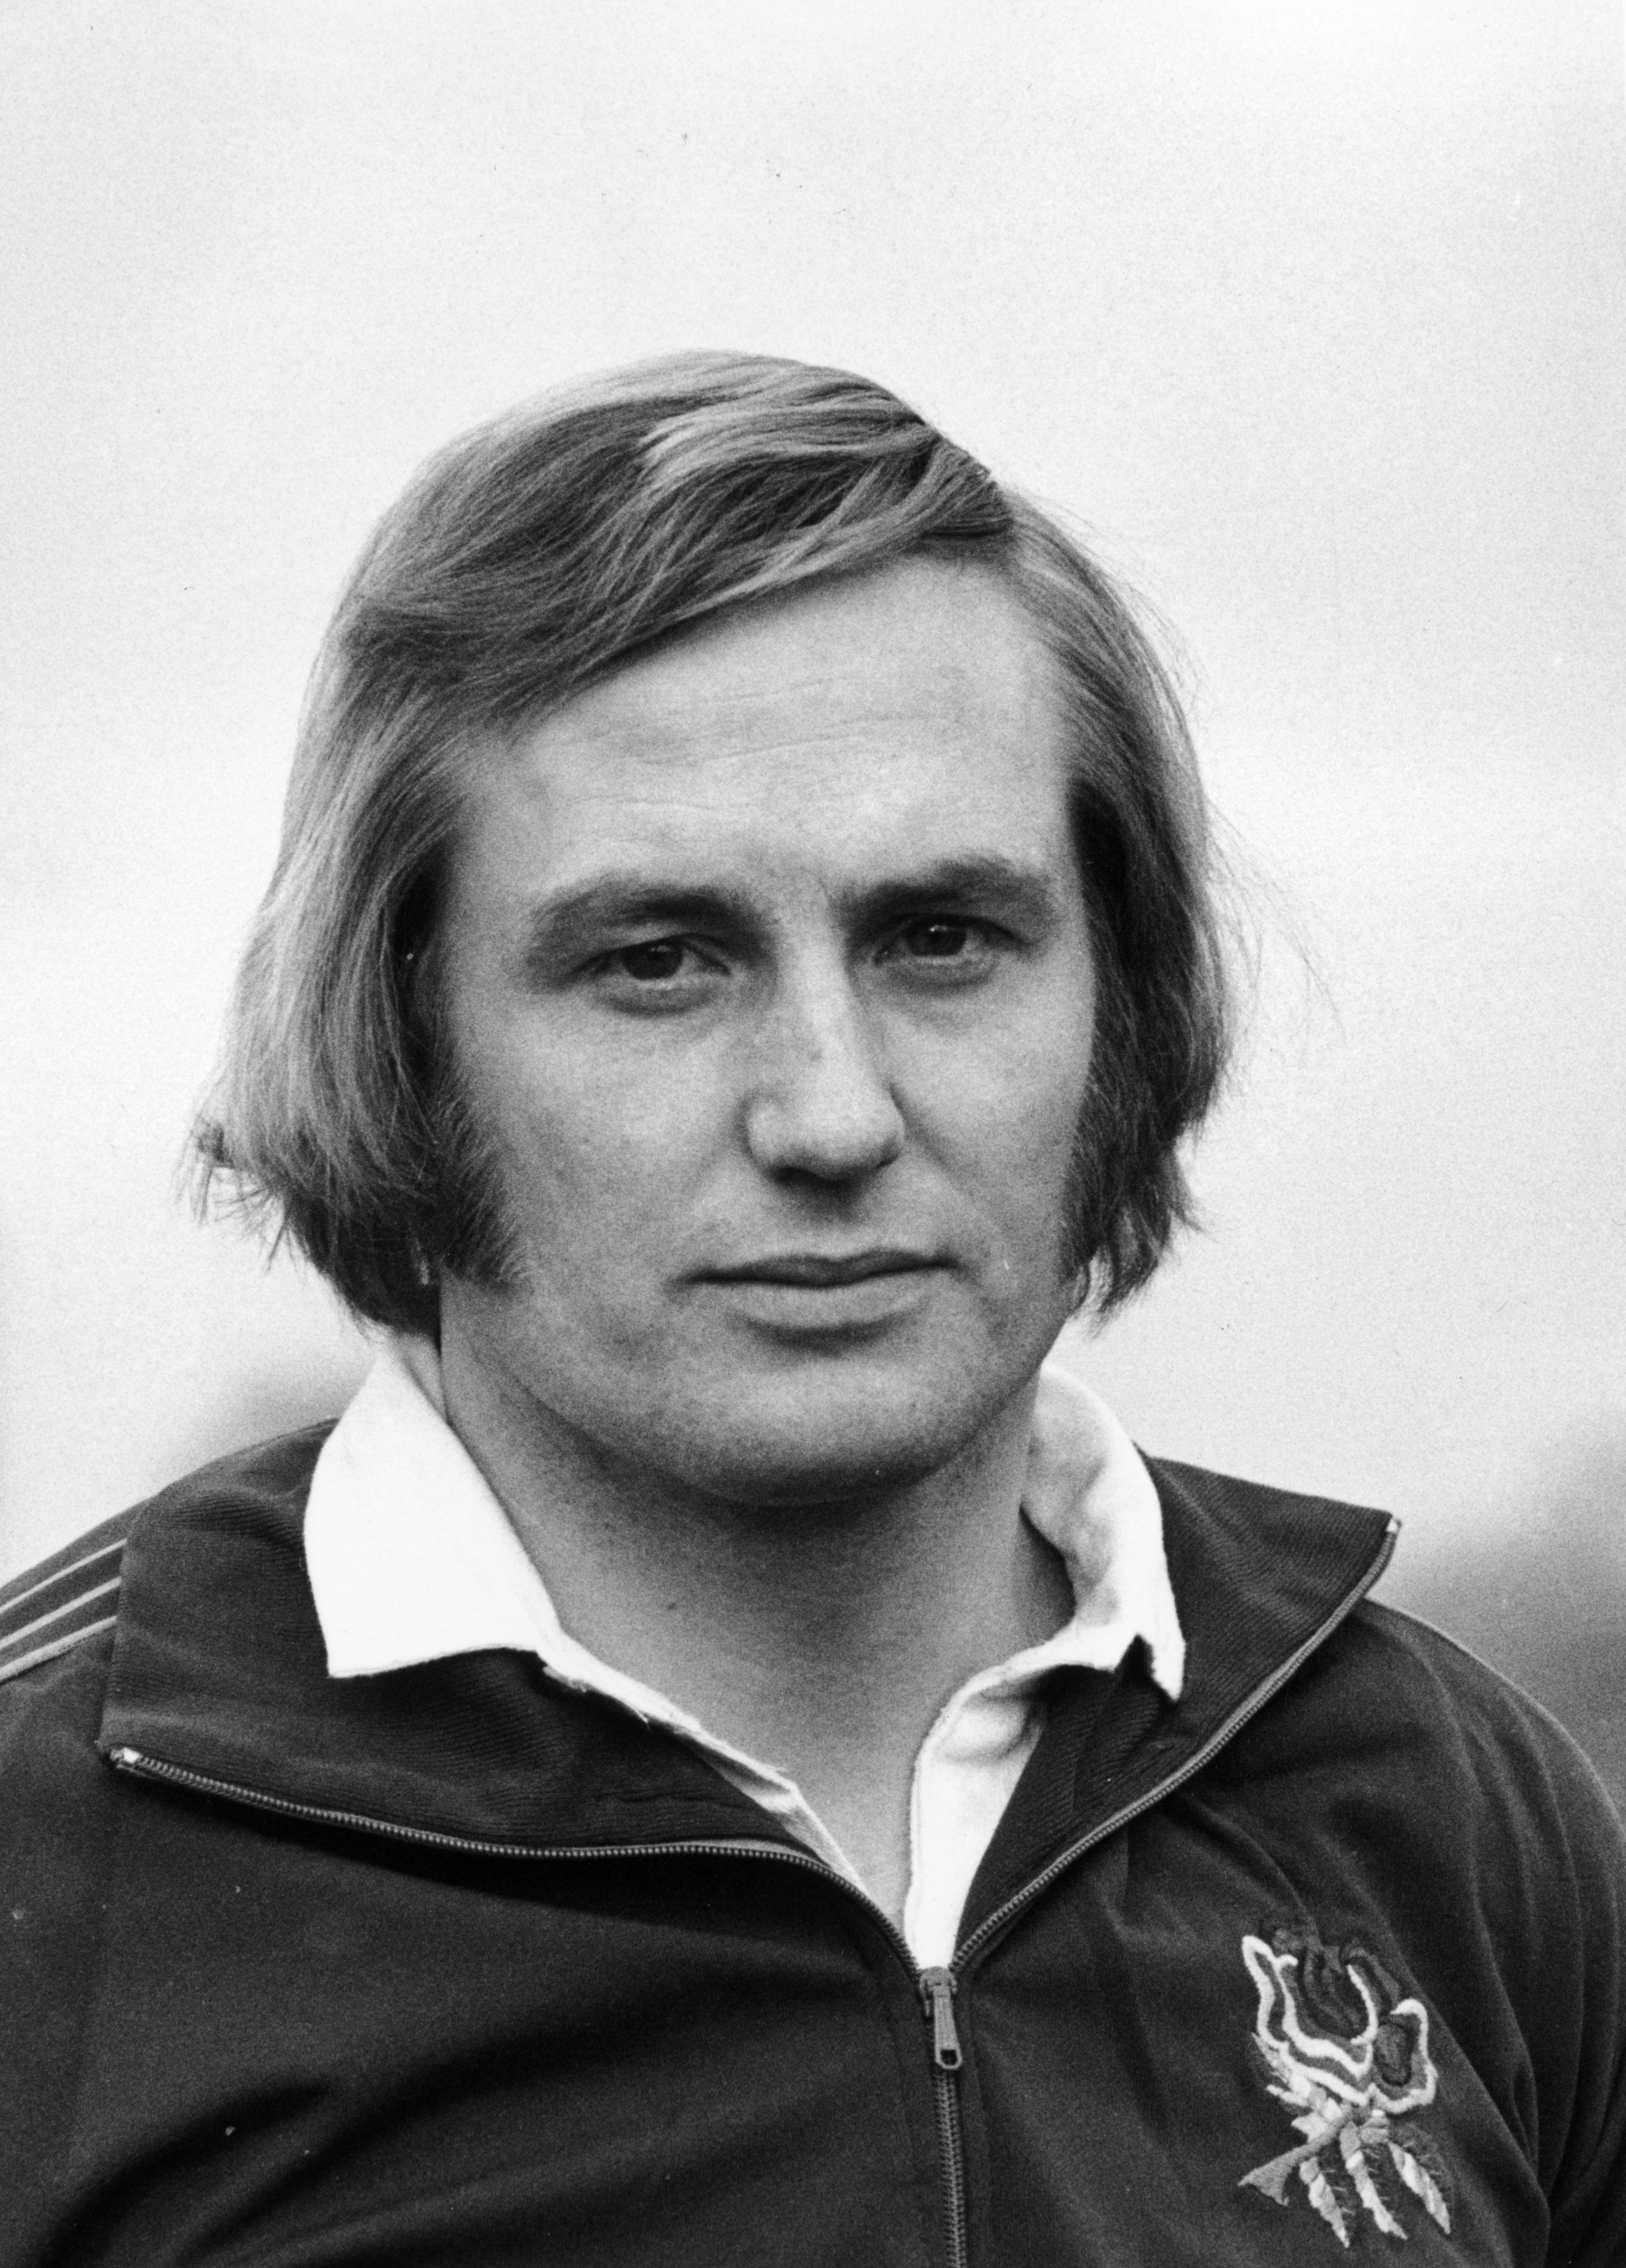 David Duckham played for the England squad for seven years